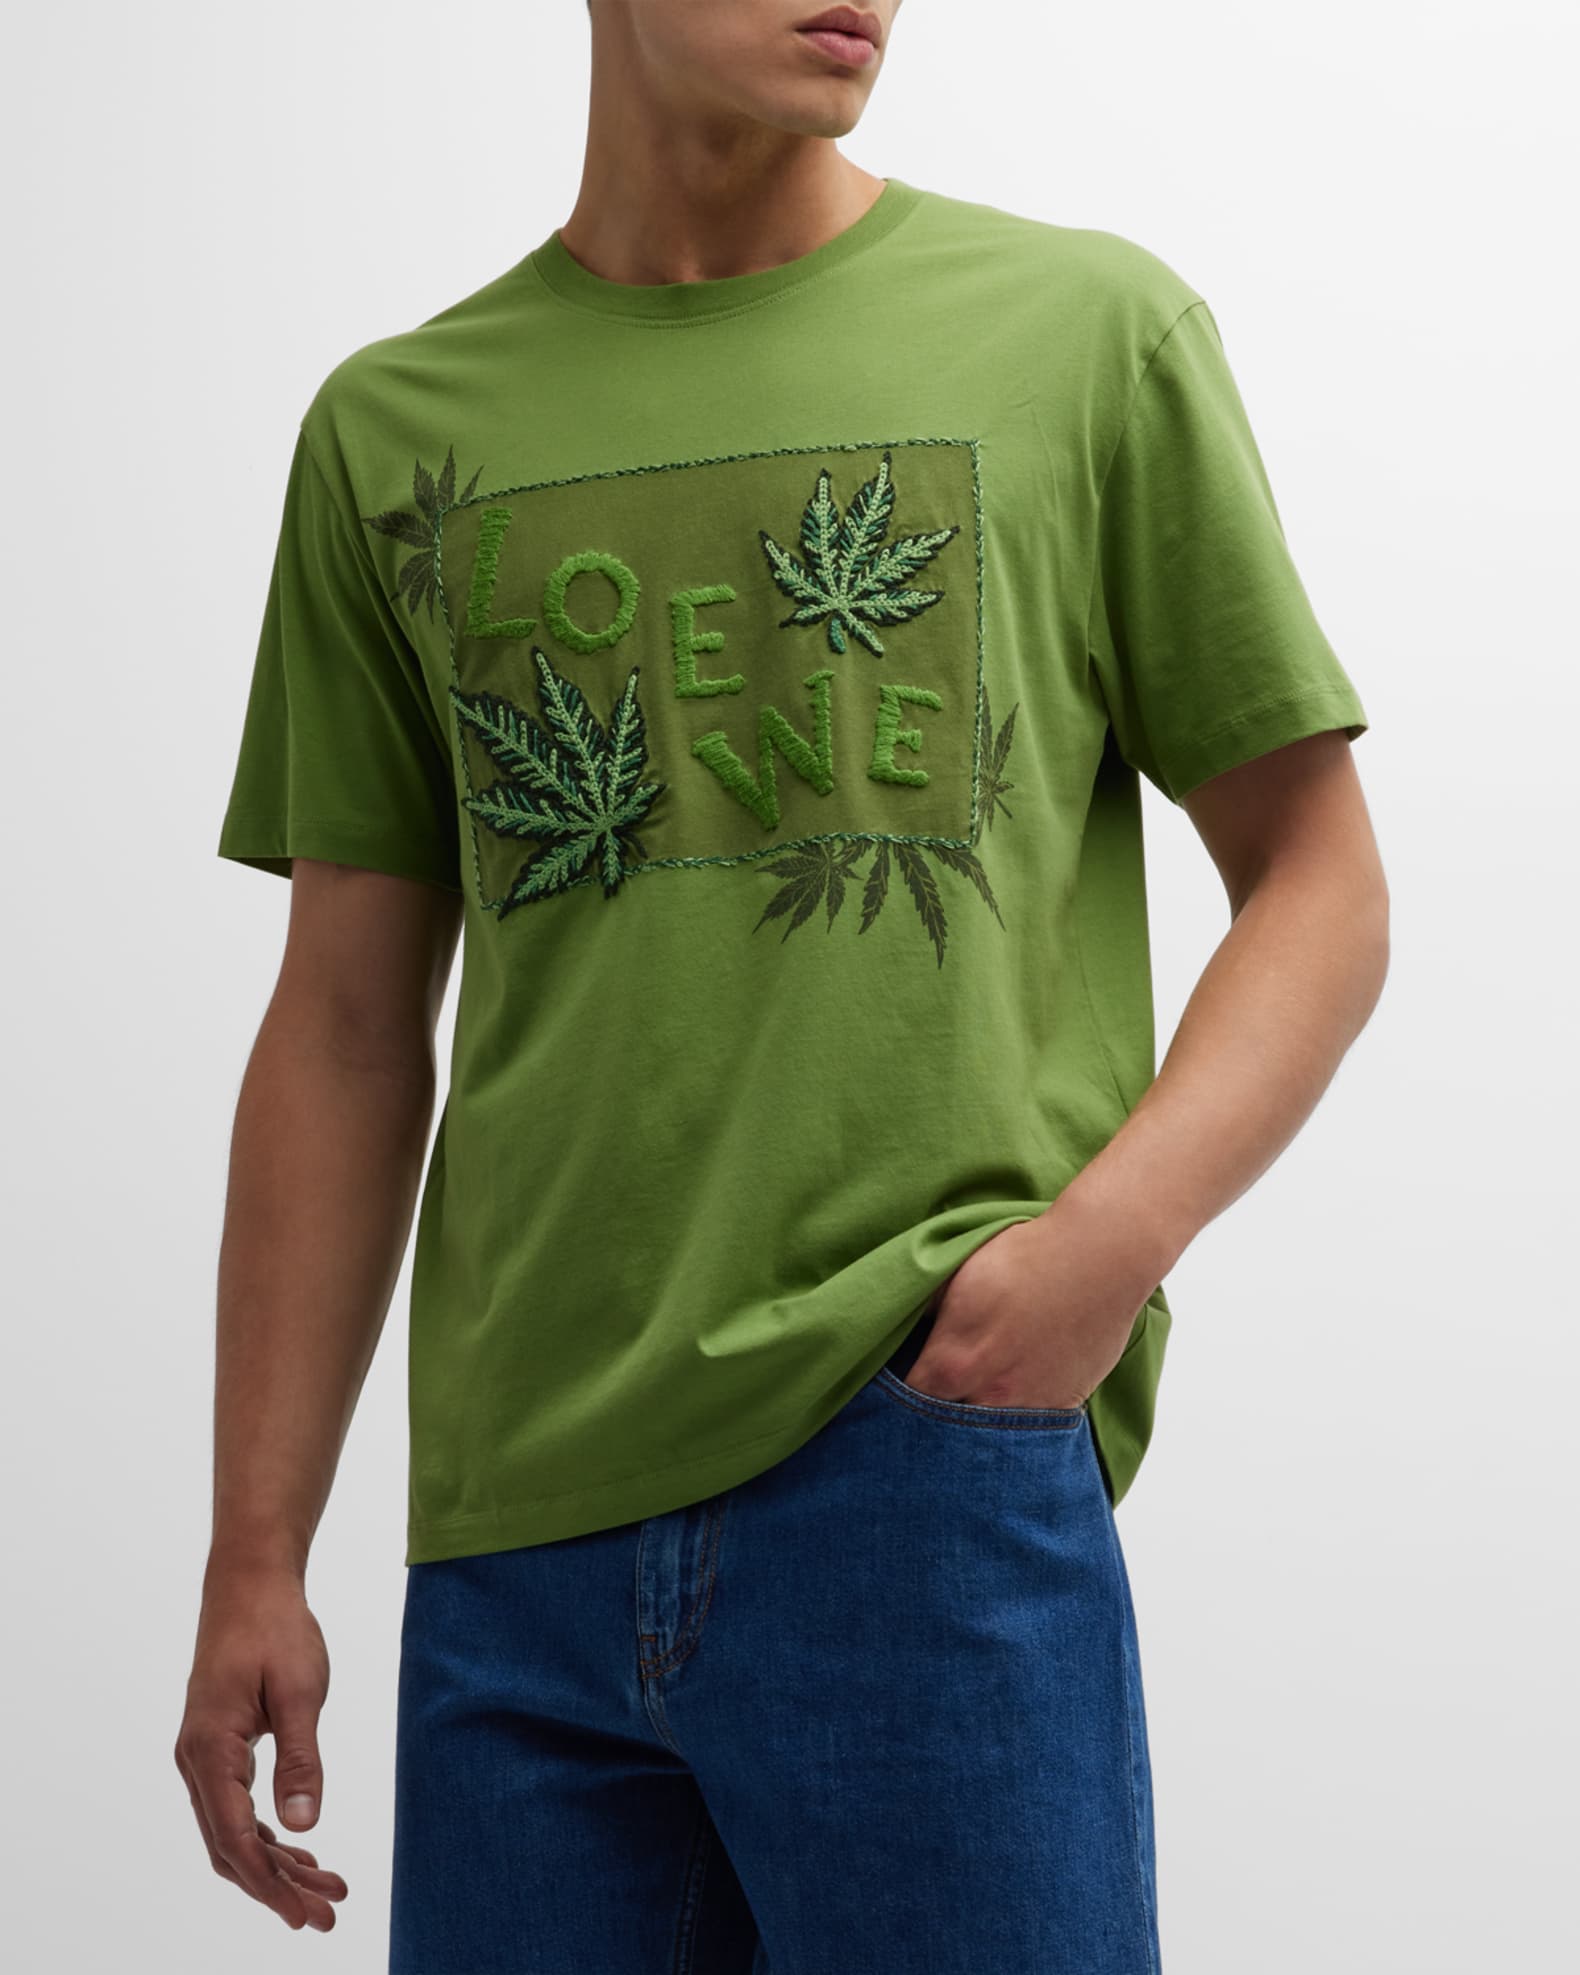 Loewe Men's Luxury Leaf Embroidered T-Shirt in Cotton - Green - Short Sleeve T-shirts